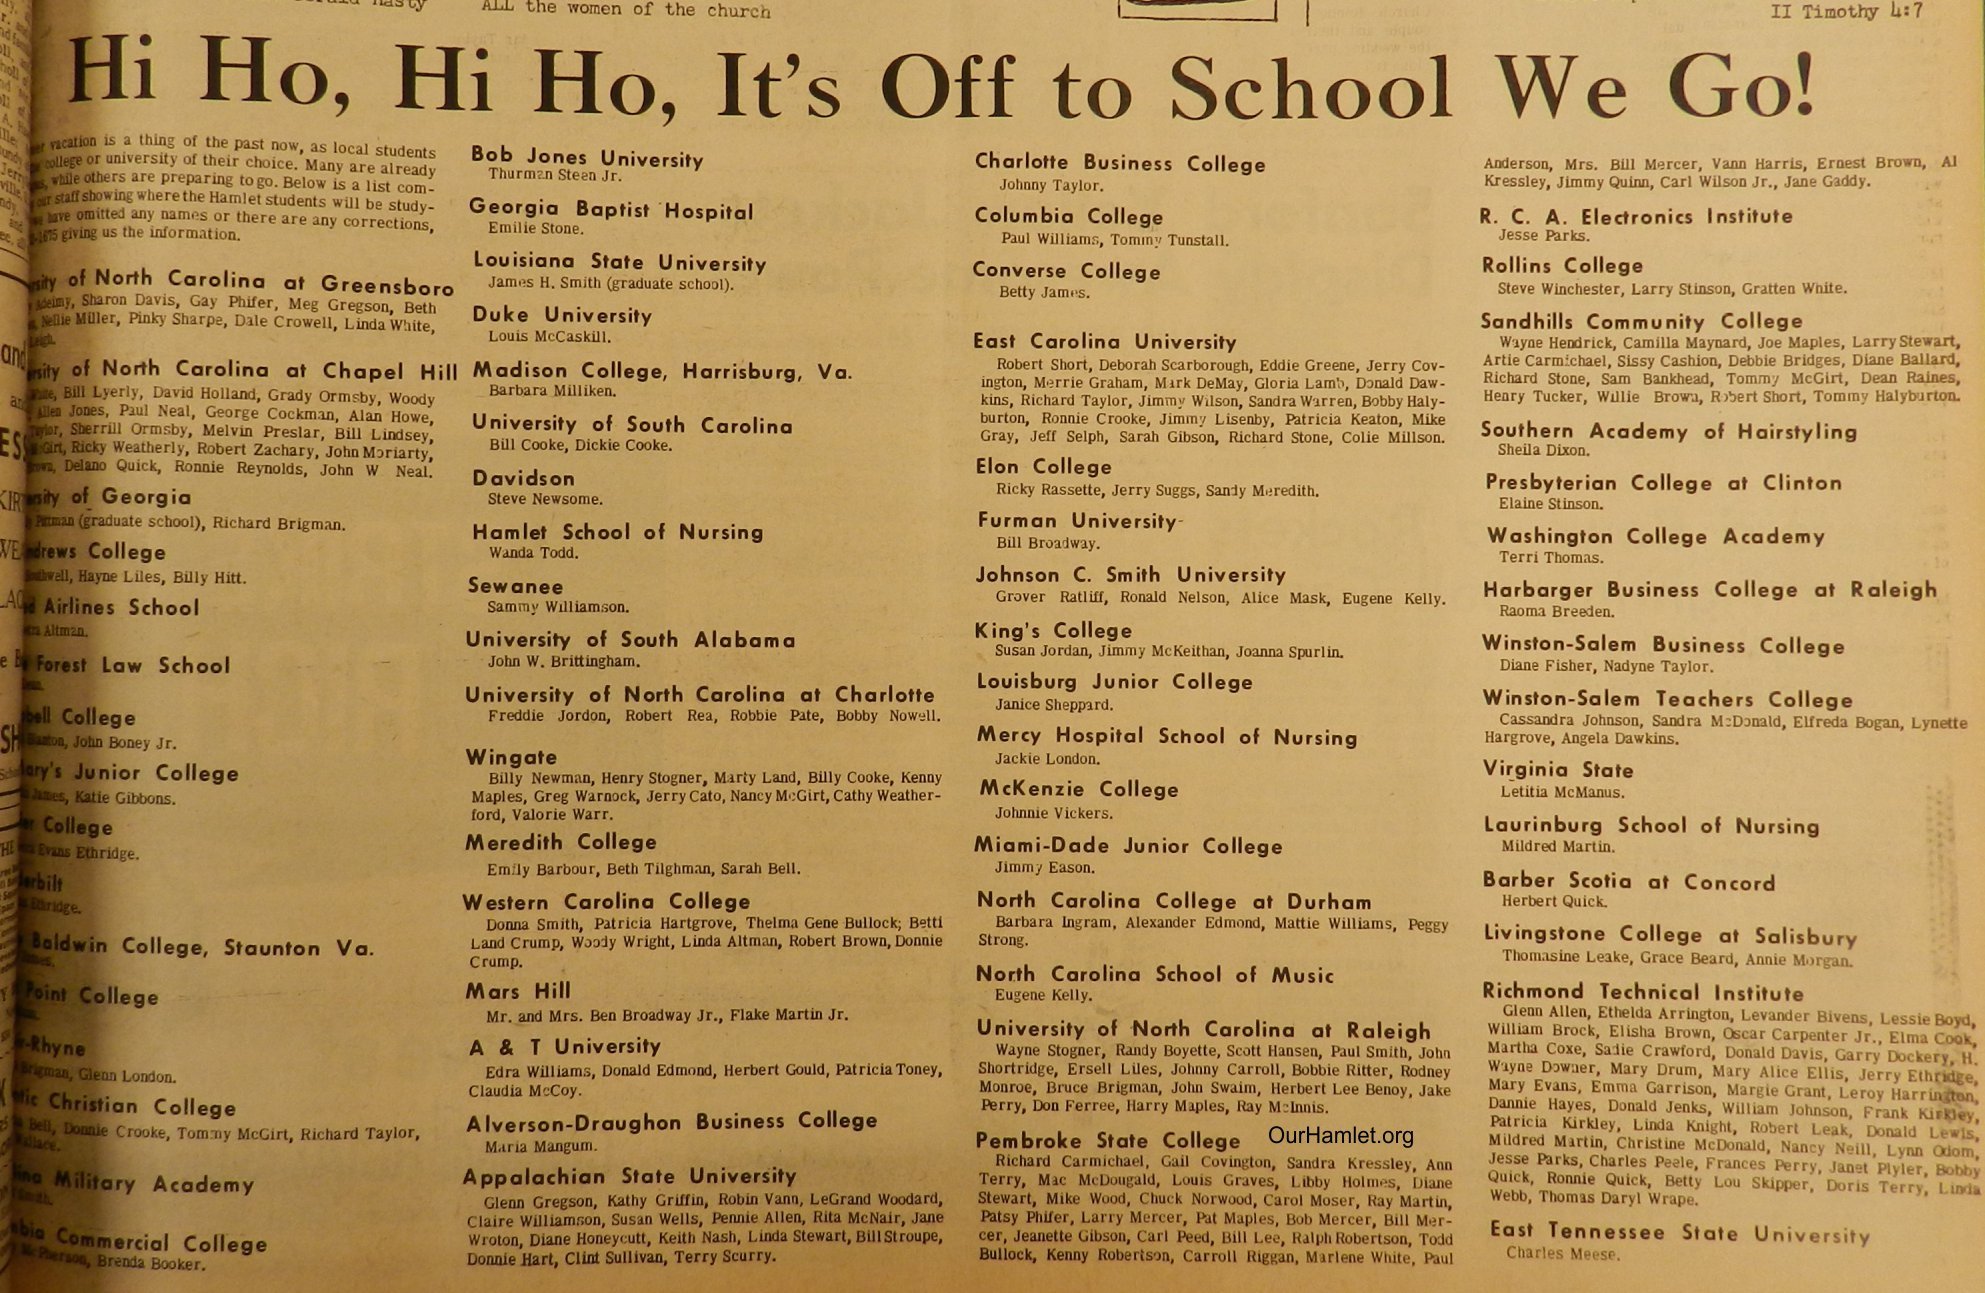 1968 HHS Off the College OH.jpg